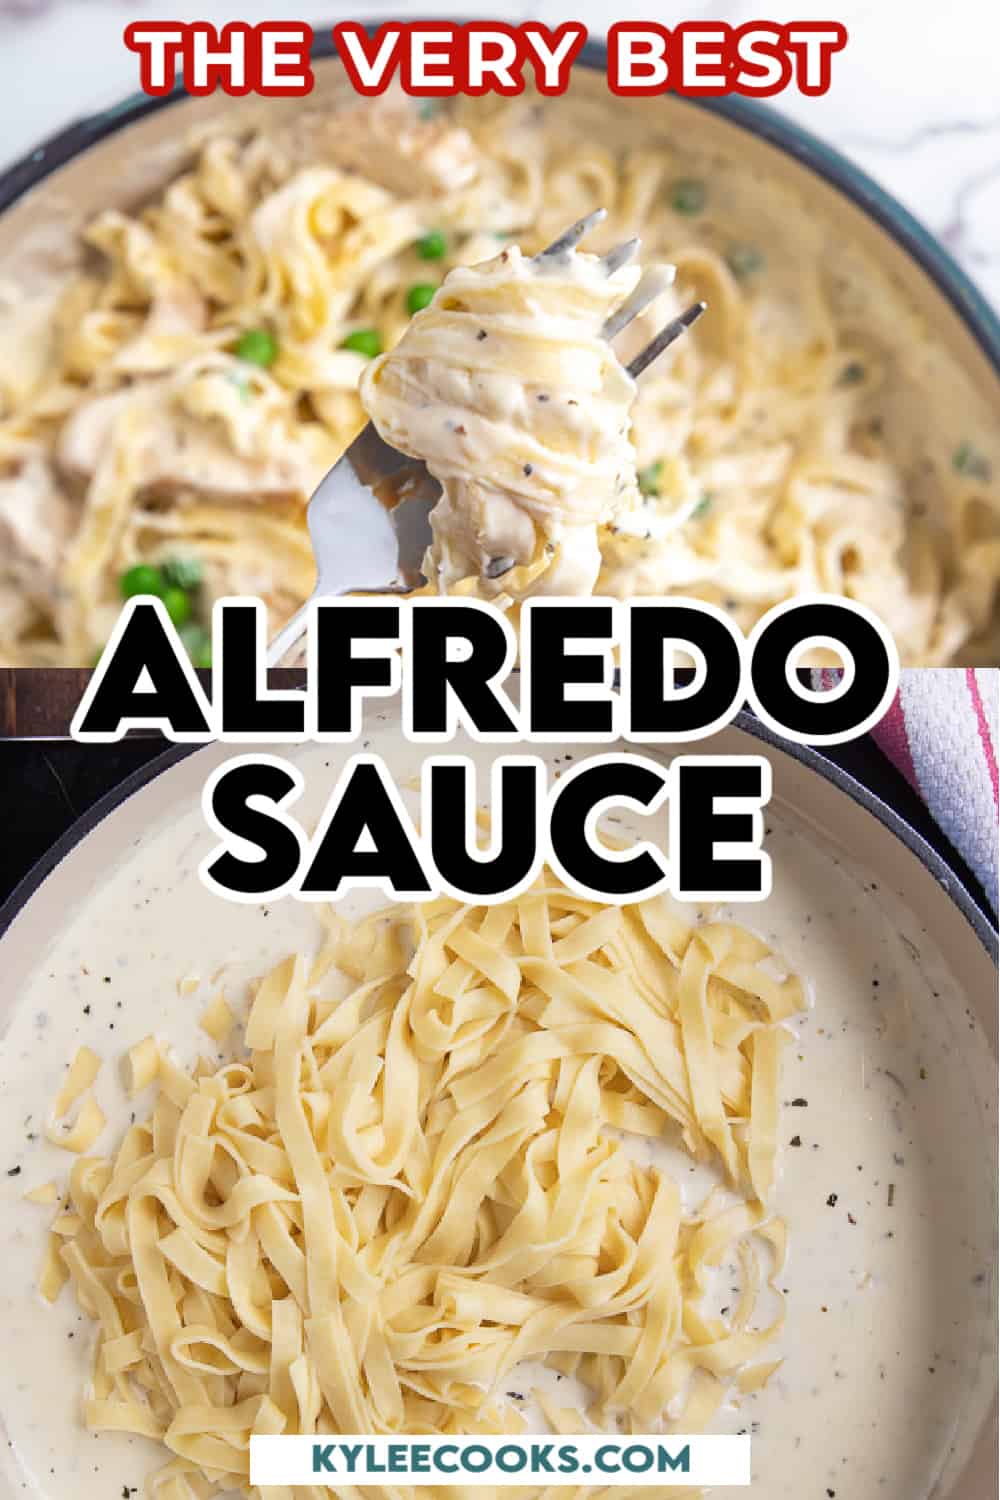 alfredo sauce in a pan with fettuccine, with recipe name overlaid in text.